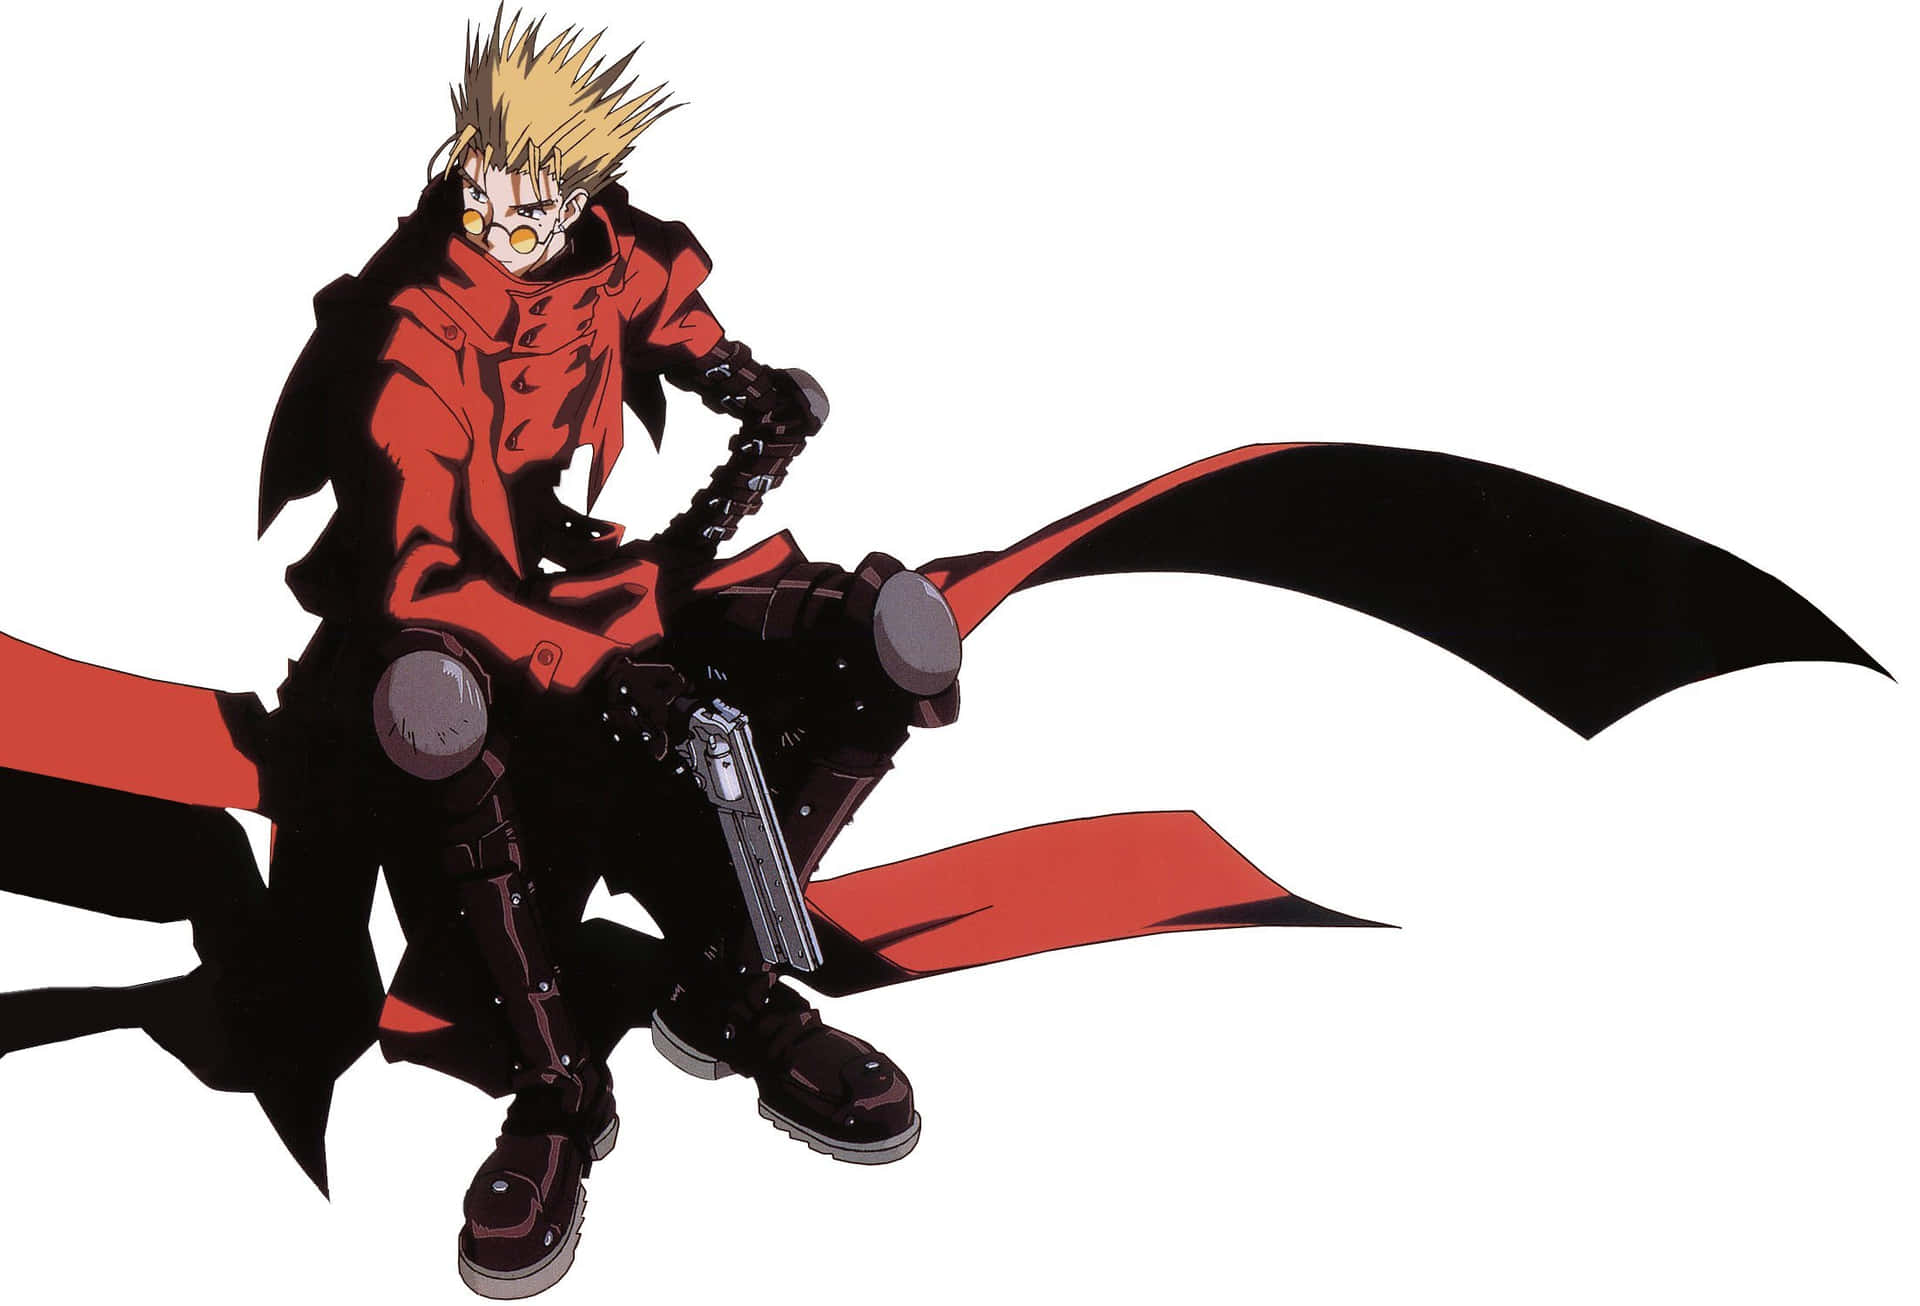 Vash the Stampede aiming with his gun in an action-packed scene Wallpaper